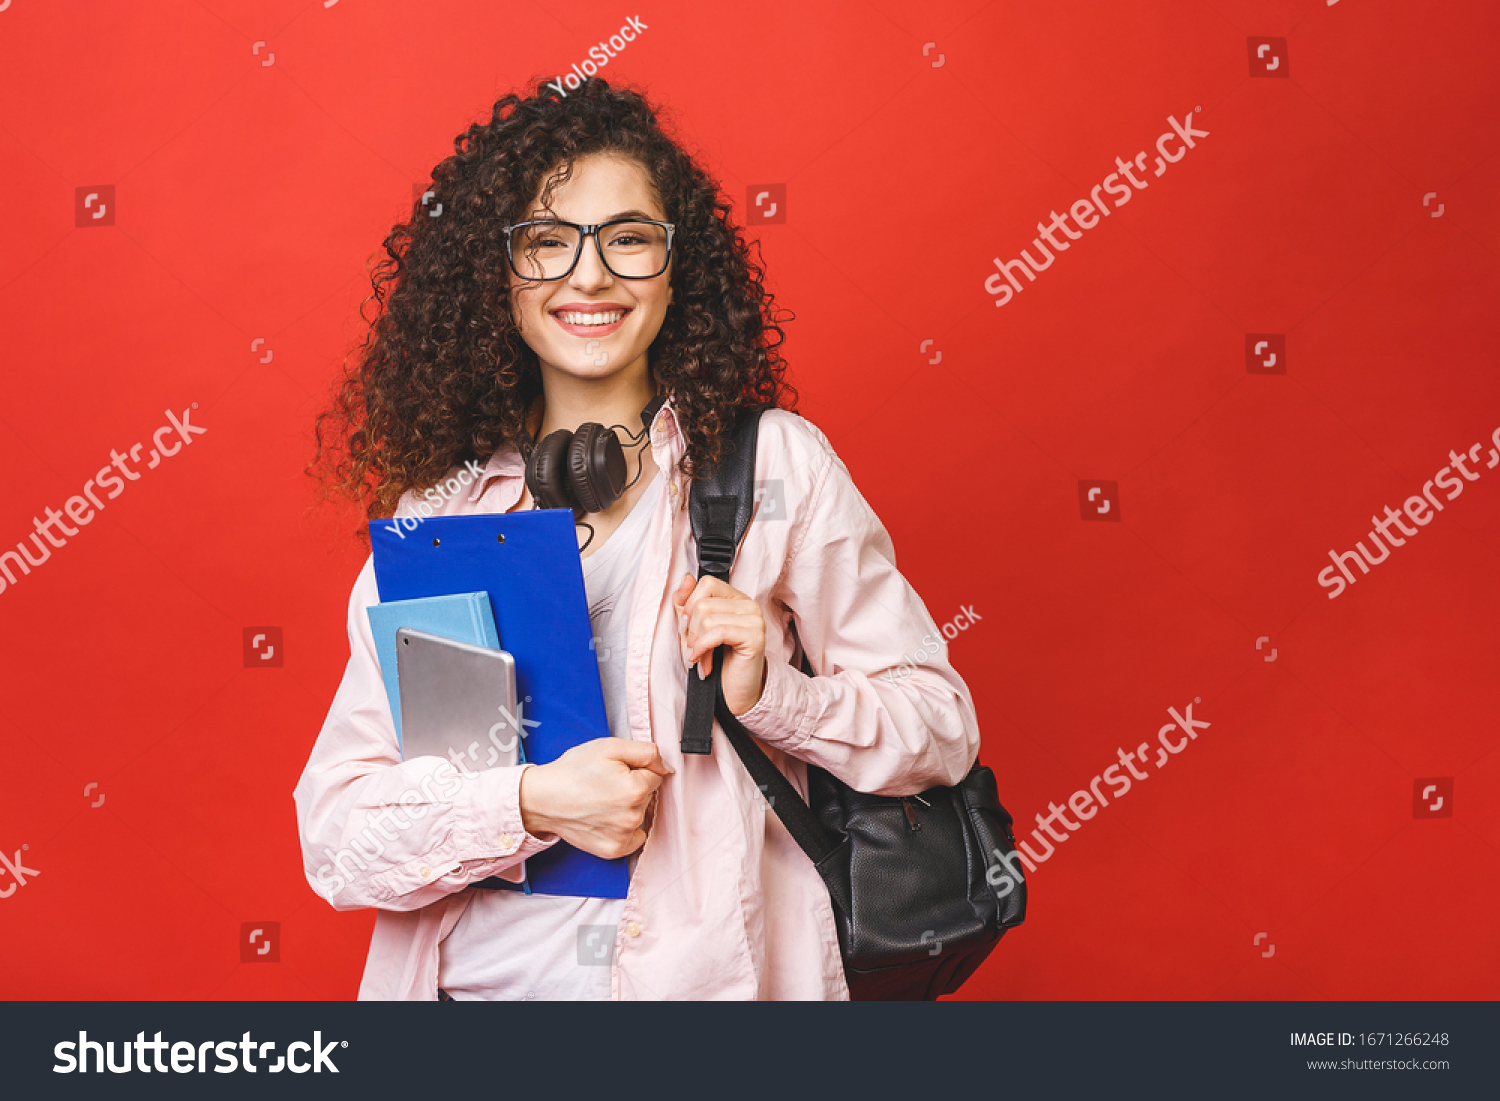 Young curly student woman wearing backpack glasses holding books and tablet over isolated red background.  #1671266248